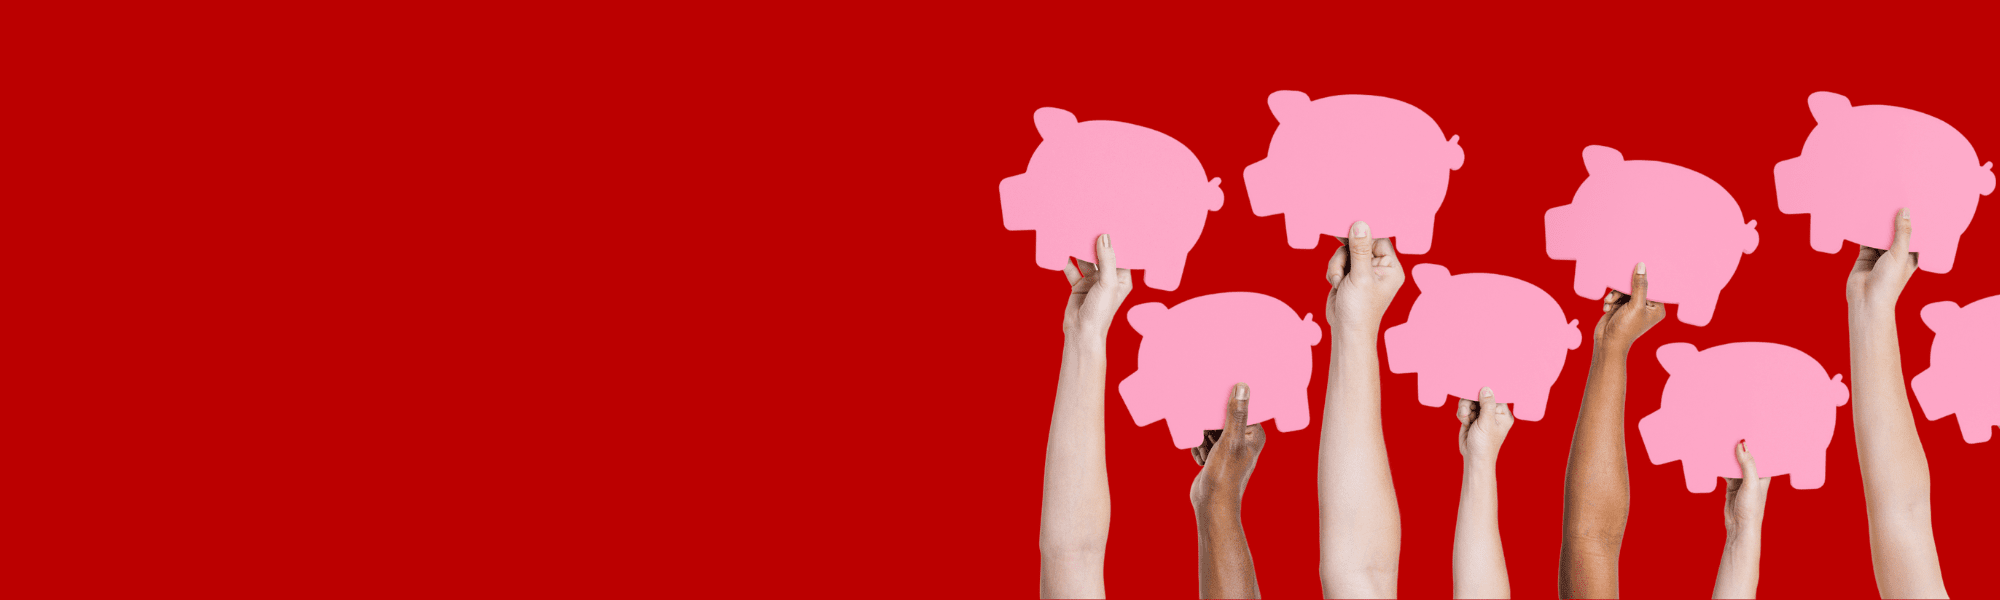 Hands holding pink cardboard pigs in the air on a red background